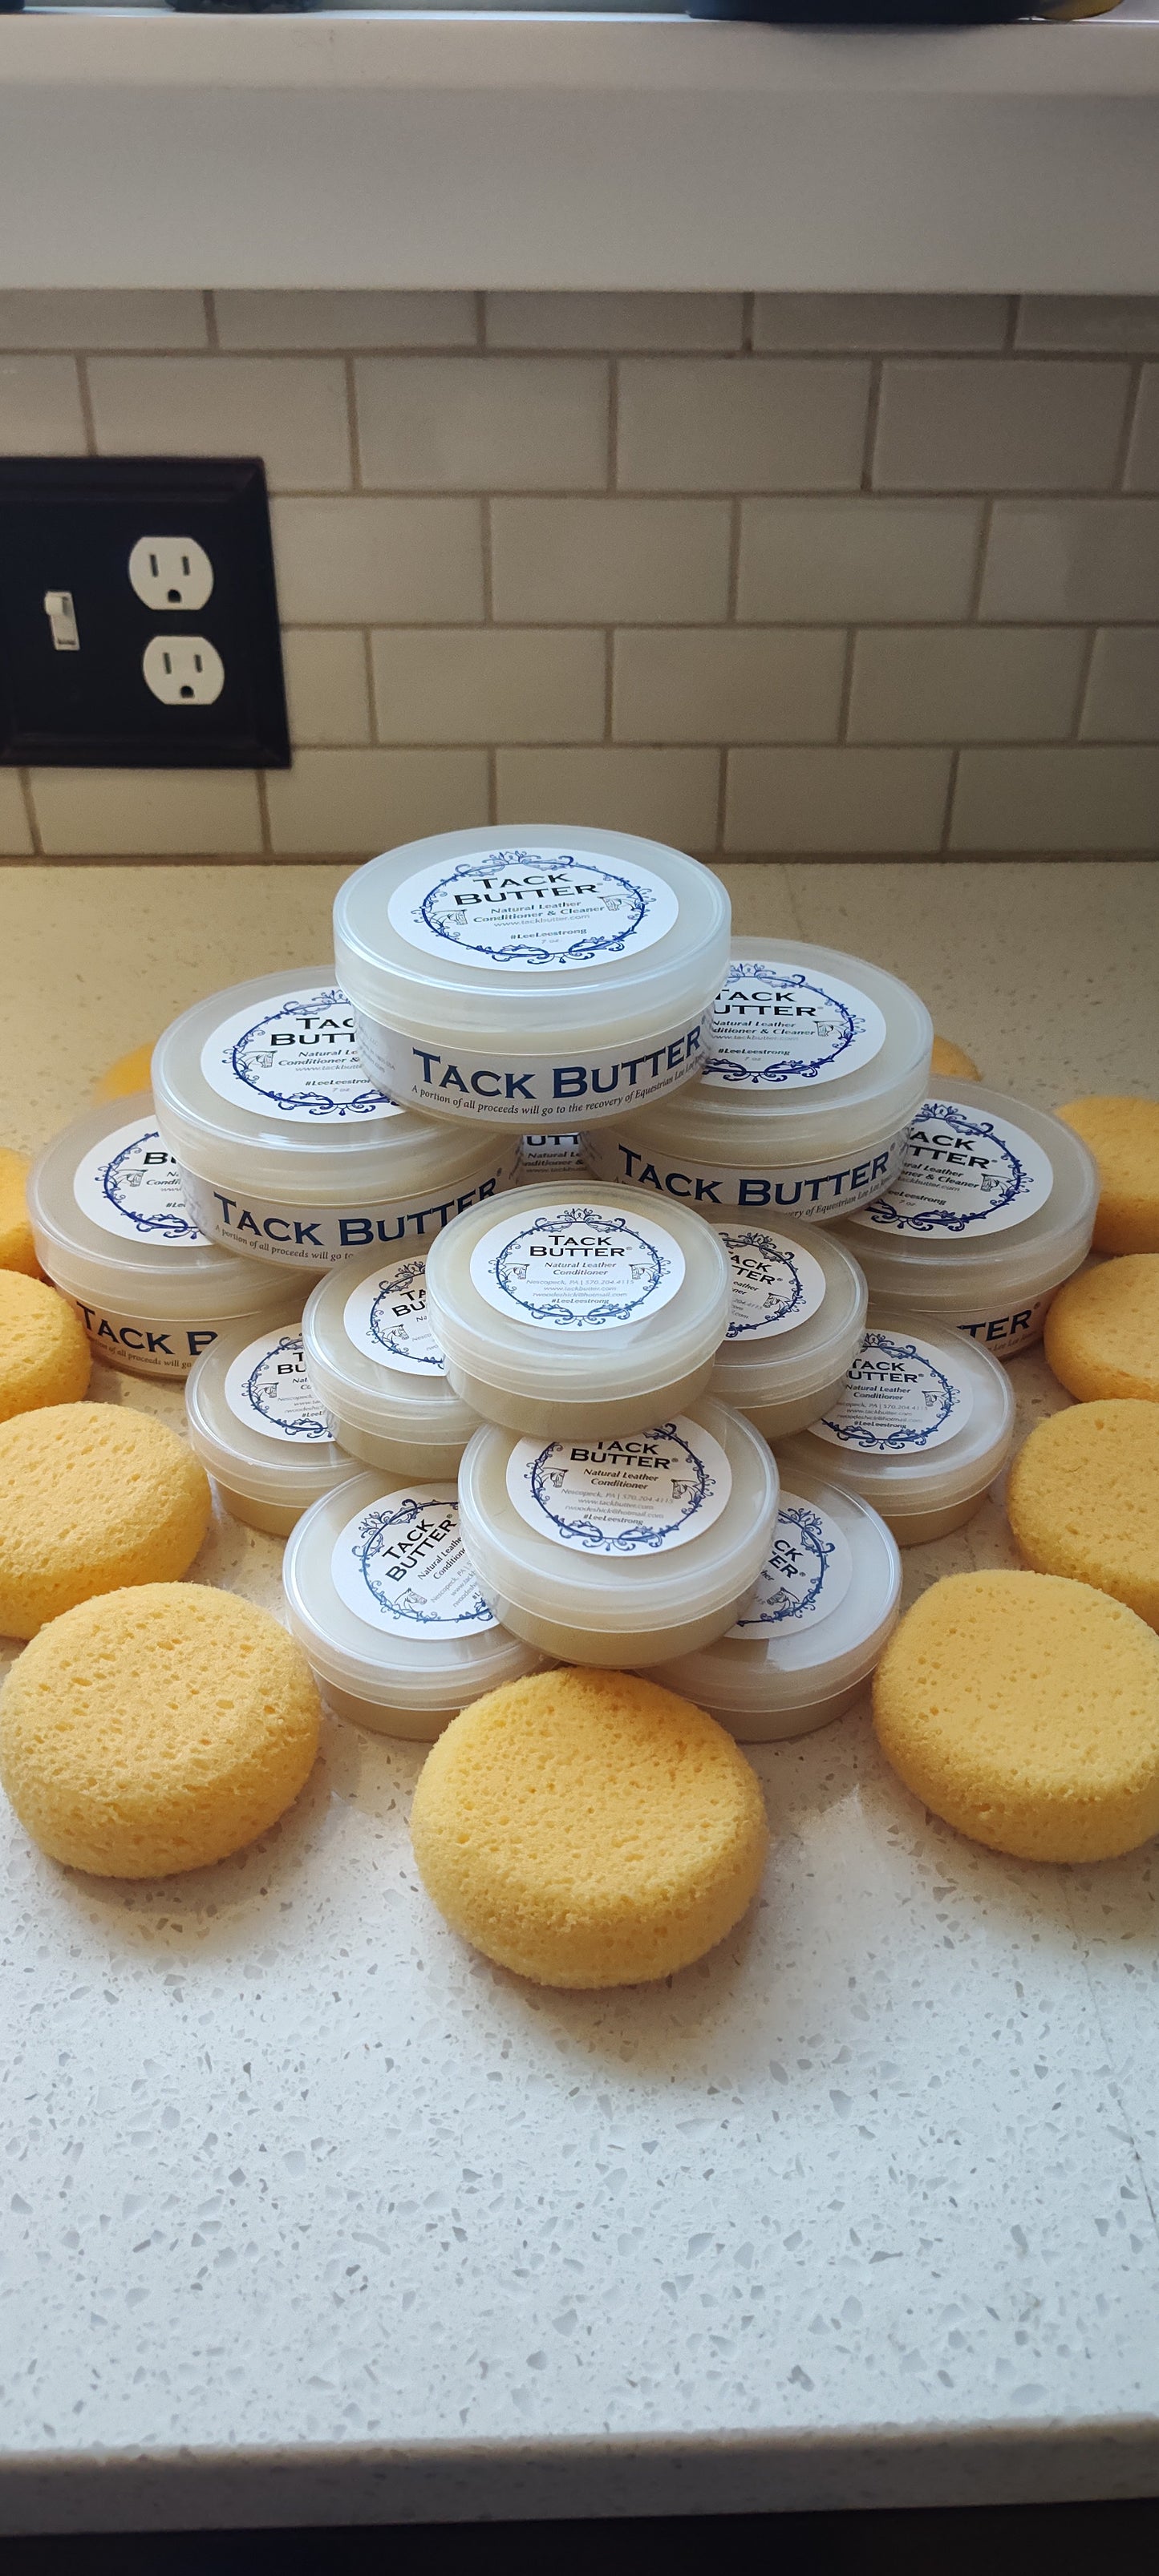 Tack Butter 7oz